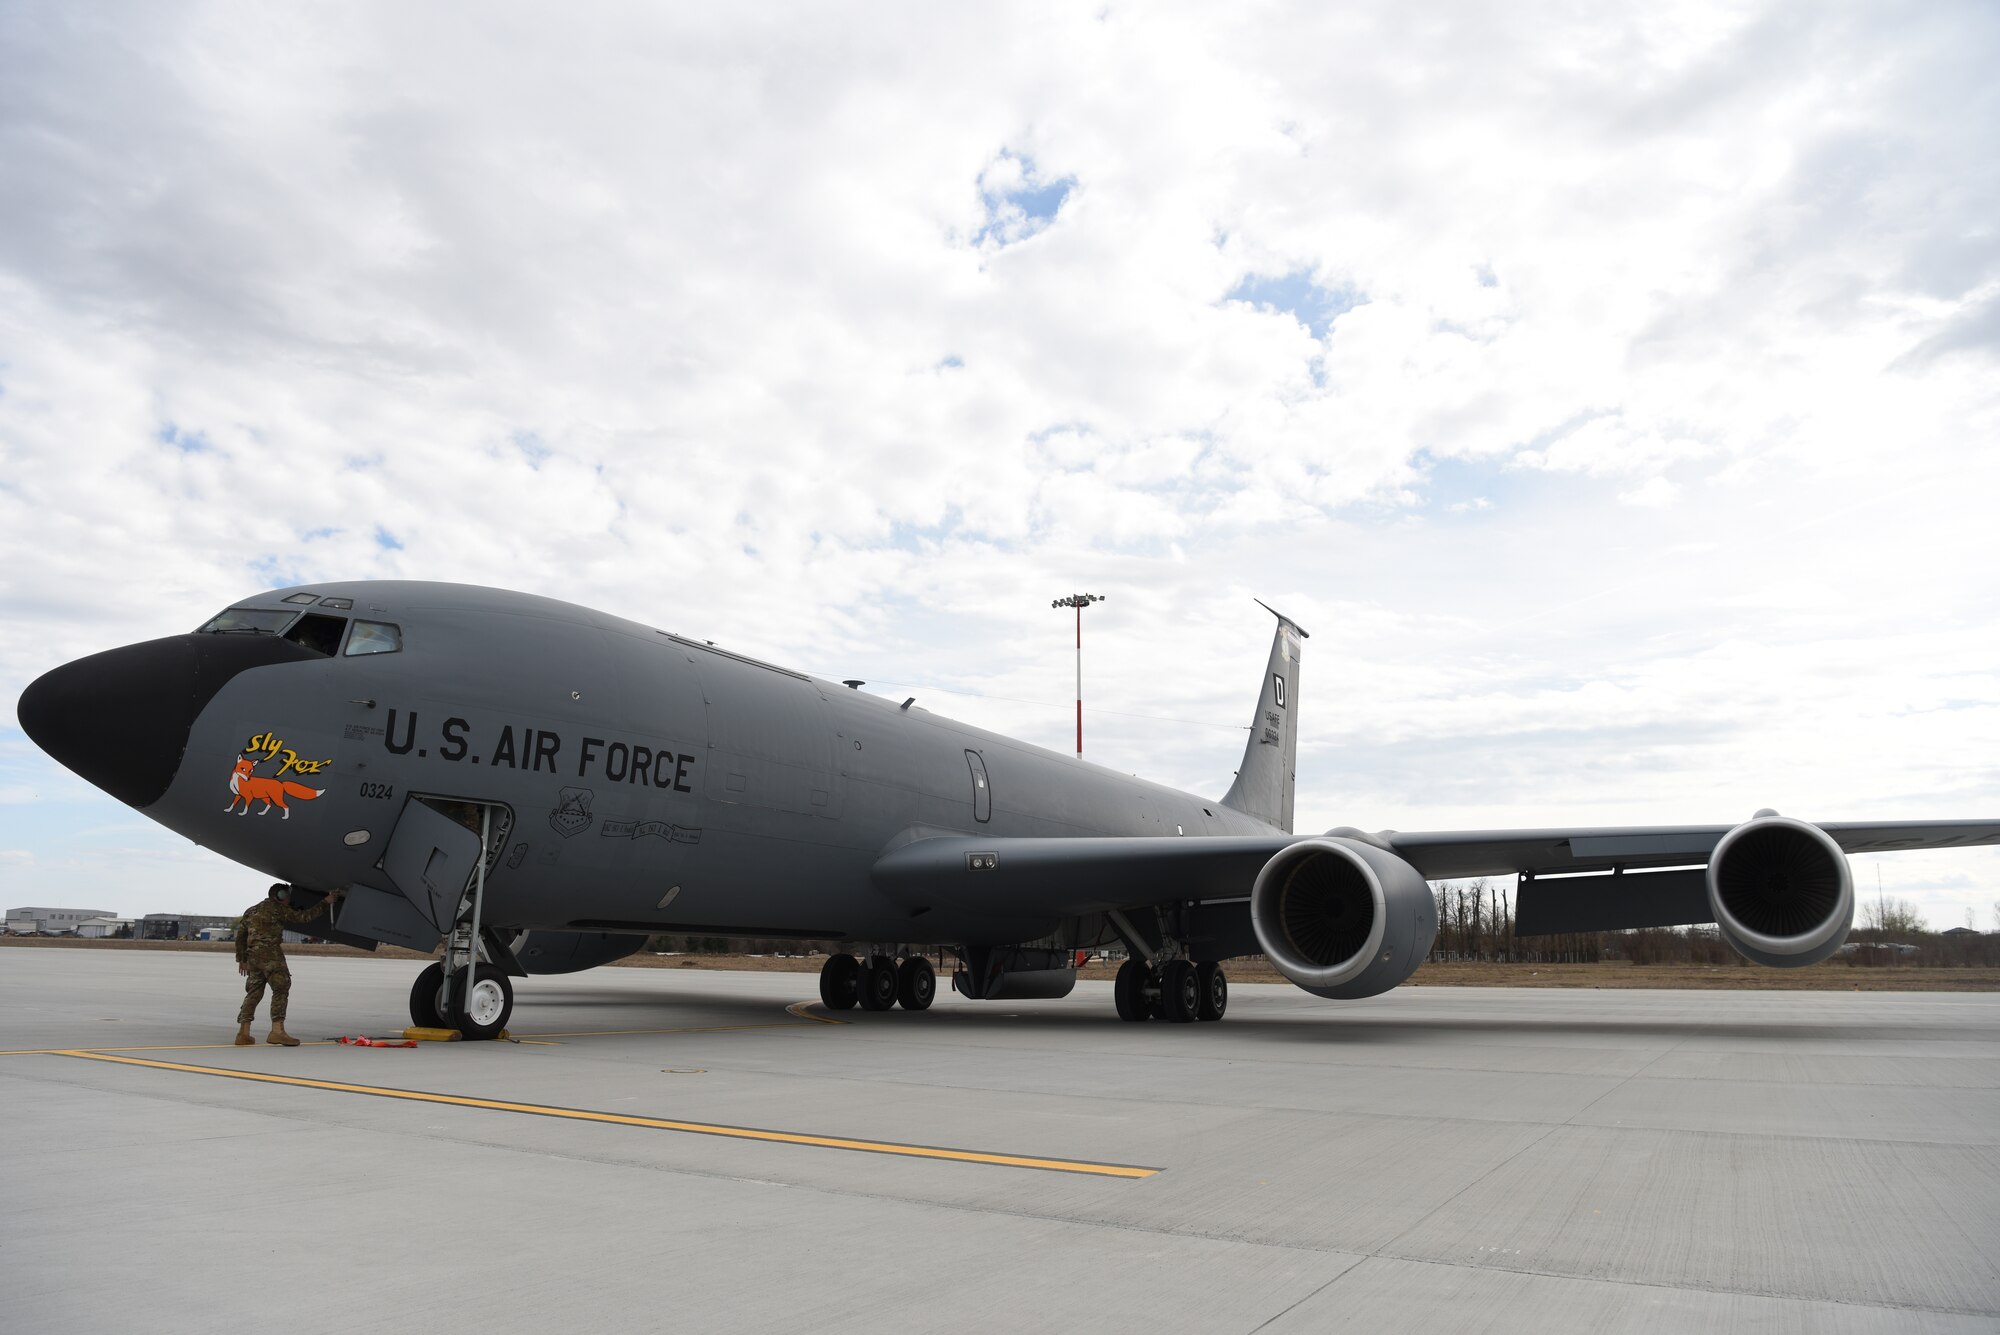 A KC-135 Stratotanker from RAF Mildenhall, England arrives in Bucharest, Romania for air refueling training with Romanian air force counterparts, March 11, 2019. The crew was involved in training with Romanian air force F-16s over the skies of Romania which enhanced regional capabilities to secure air sovereignty and promote peace and security through cooperation, collaboration, interoperability with NATO partners and other allies in the region. (U.S. Air Force photo by Airman 1st Class Brandon Esau)